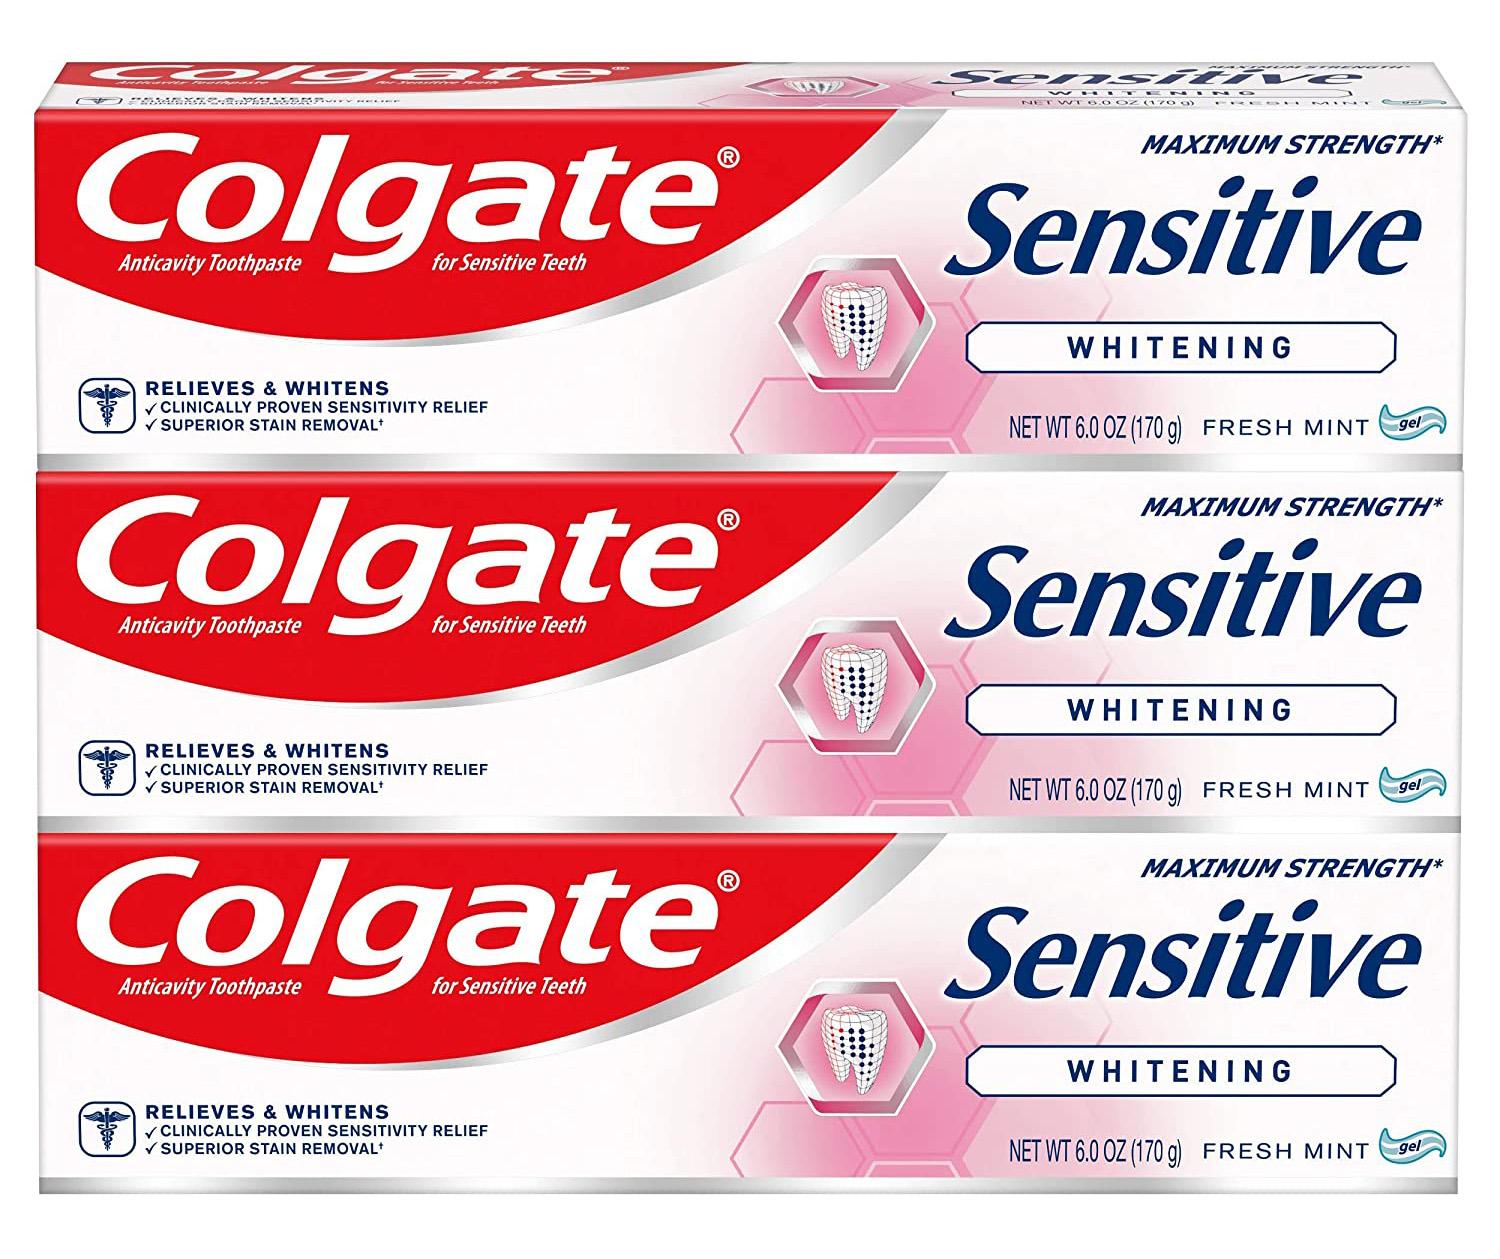 3 Colgate Sensitive Maximum Strength Whitening Toothpastes for $8.15 Shipped